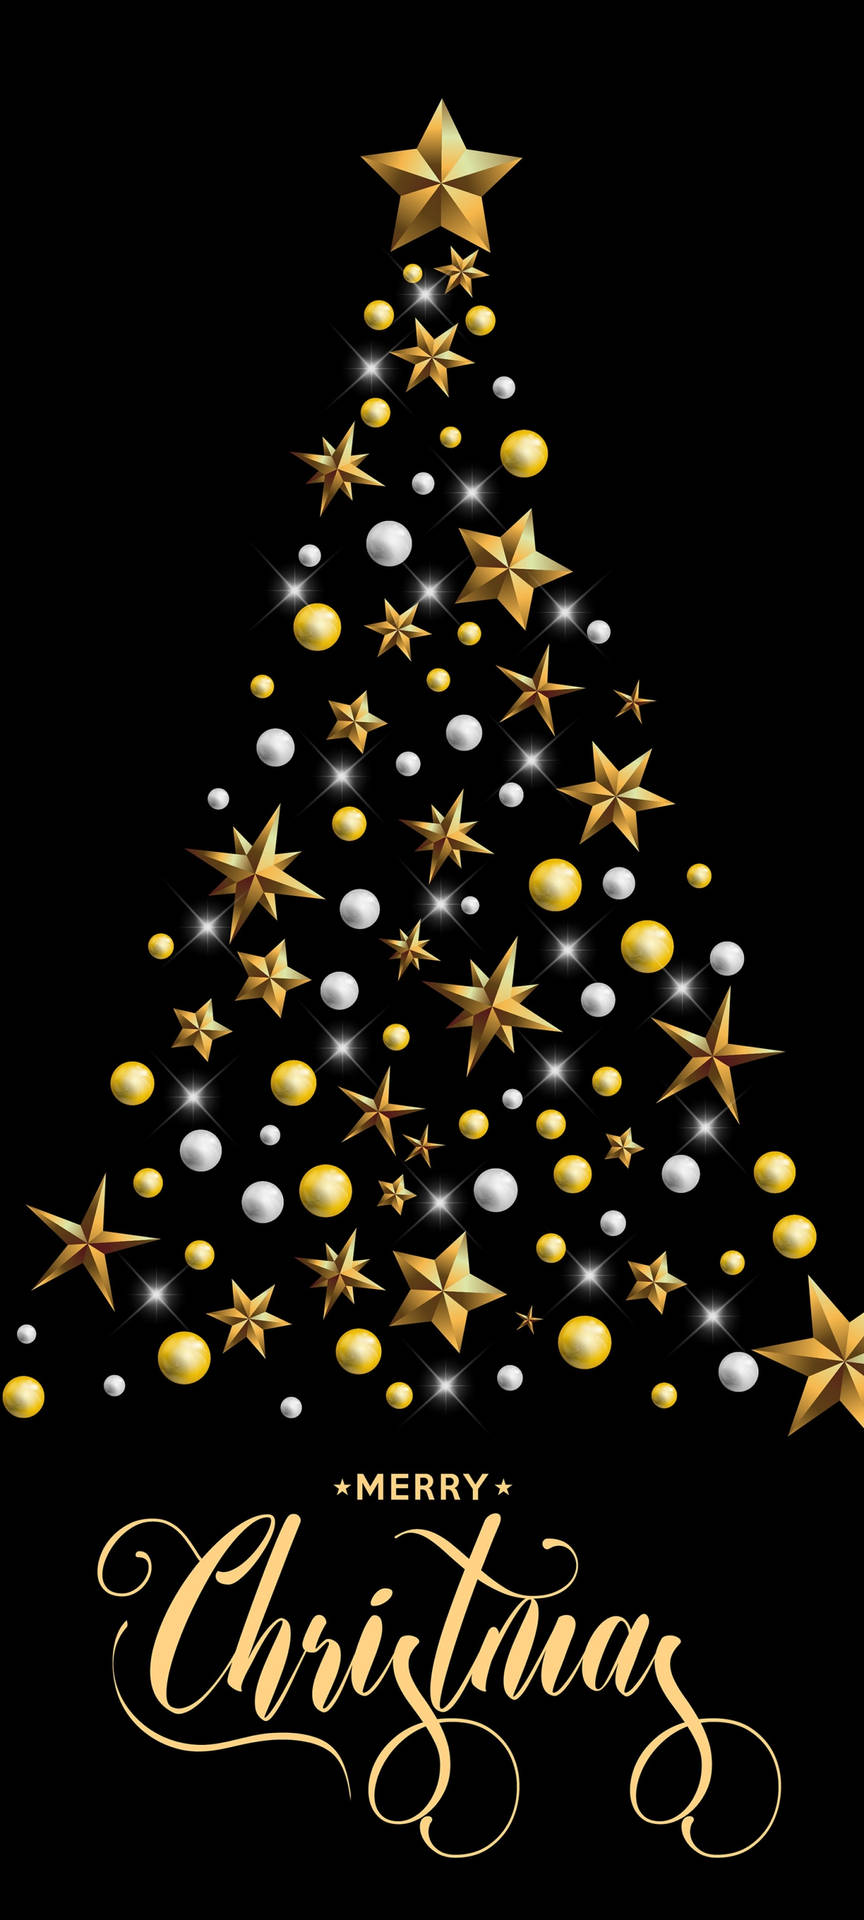 Celebrate this holiday season with Black Christmas Wallpaper